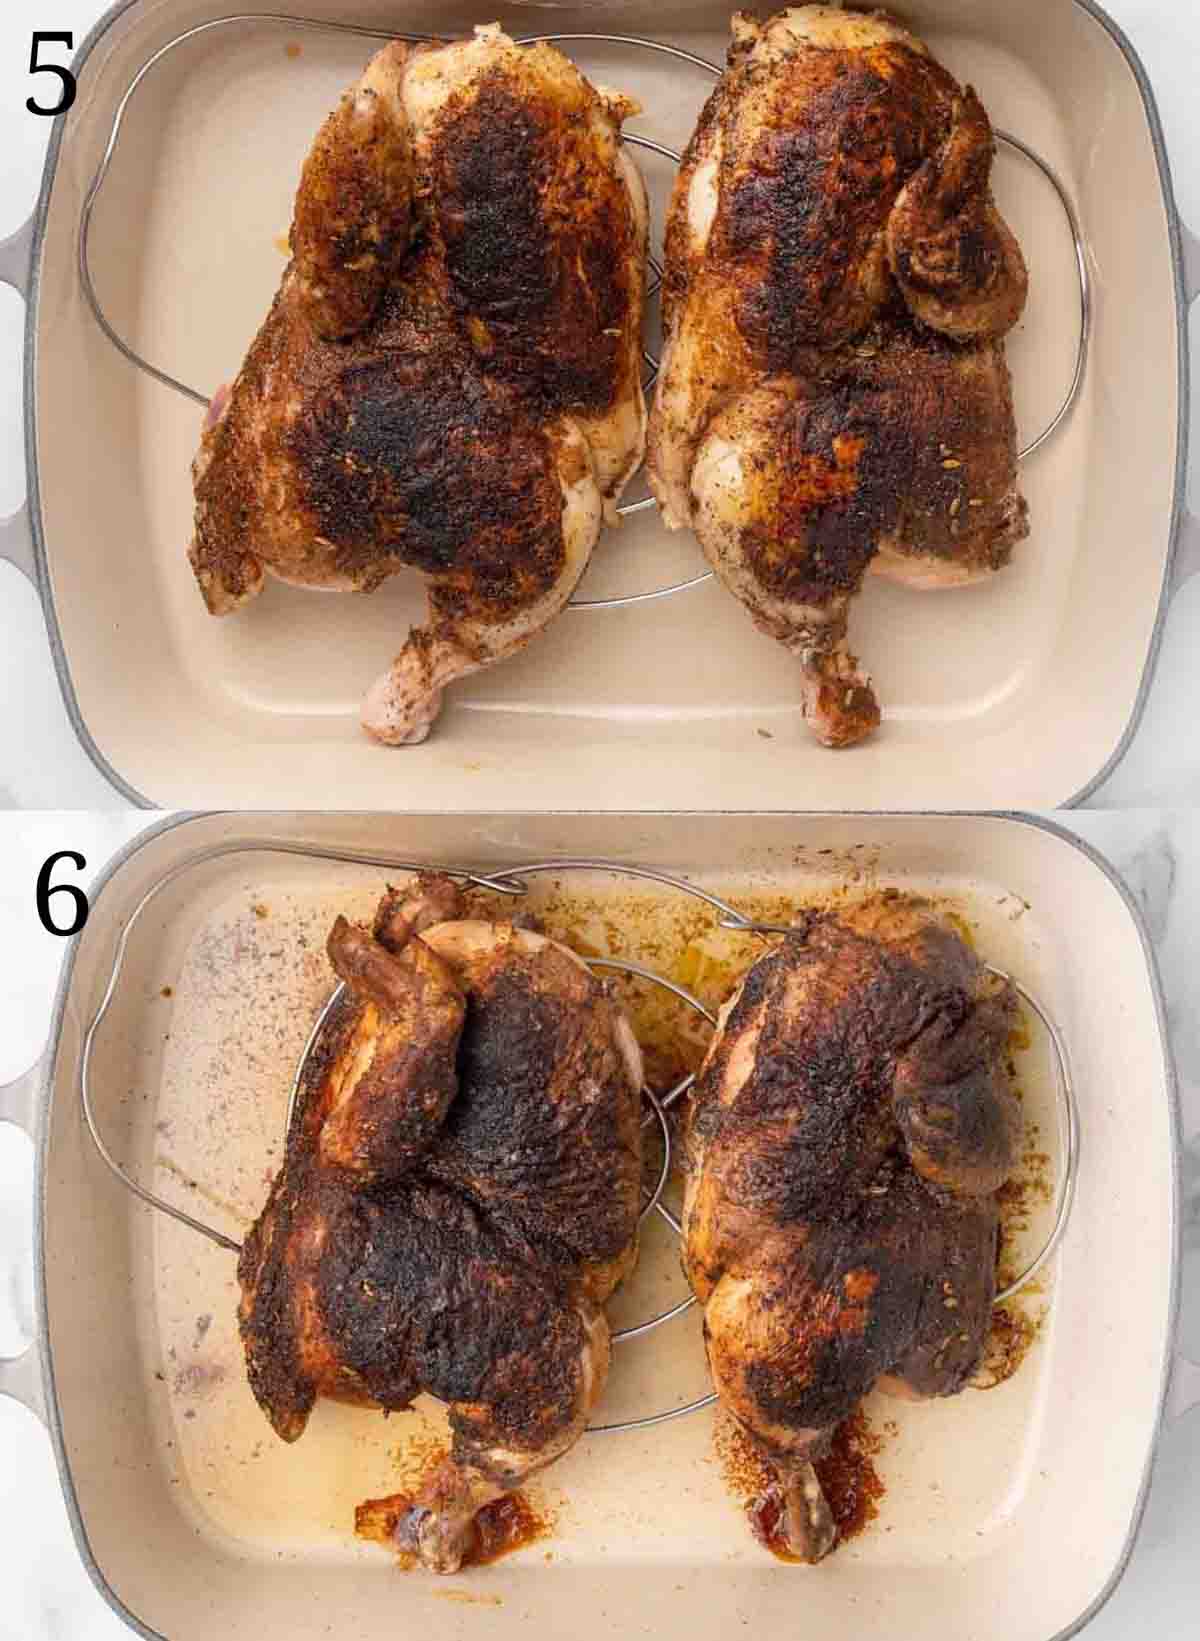 two images showing how to cook chicen